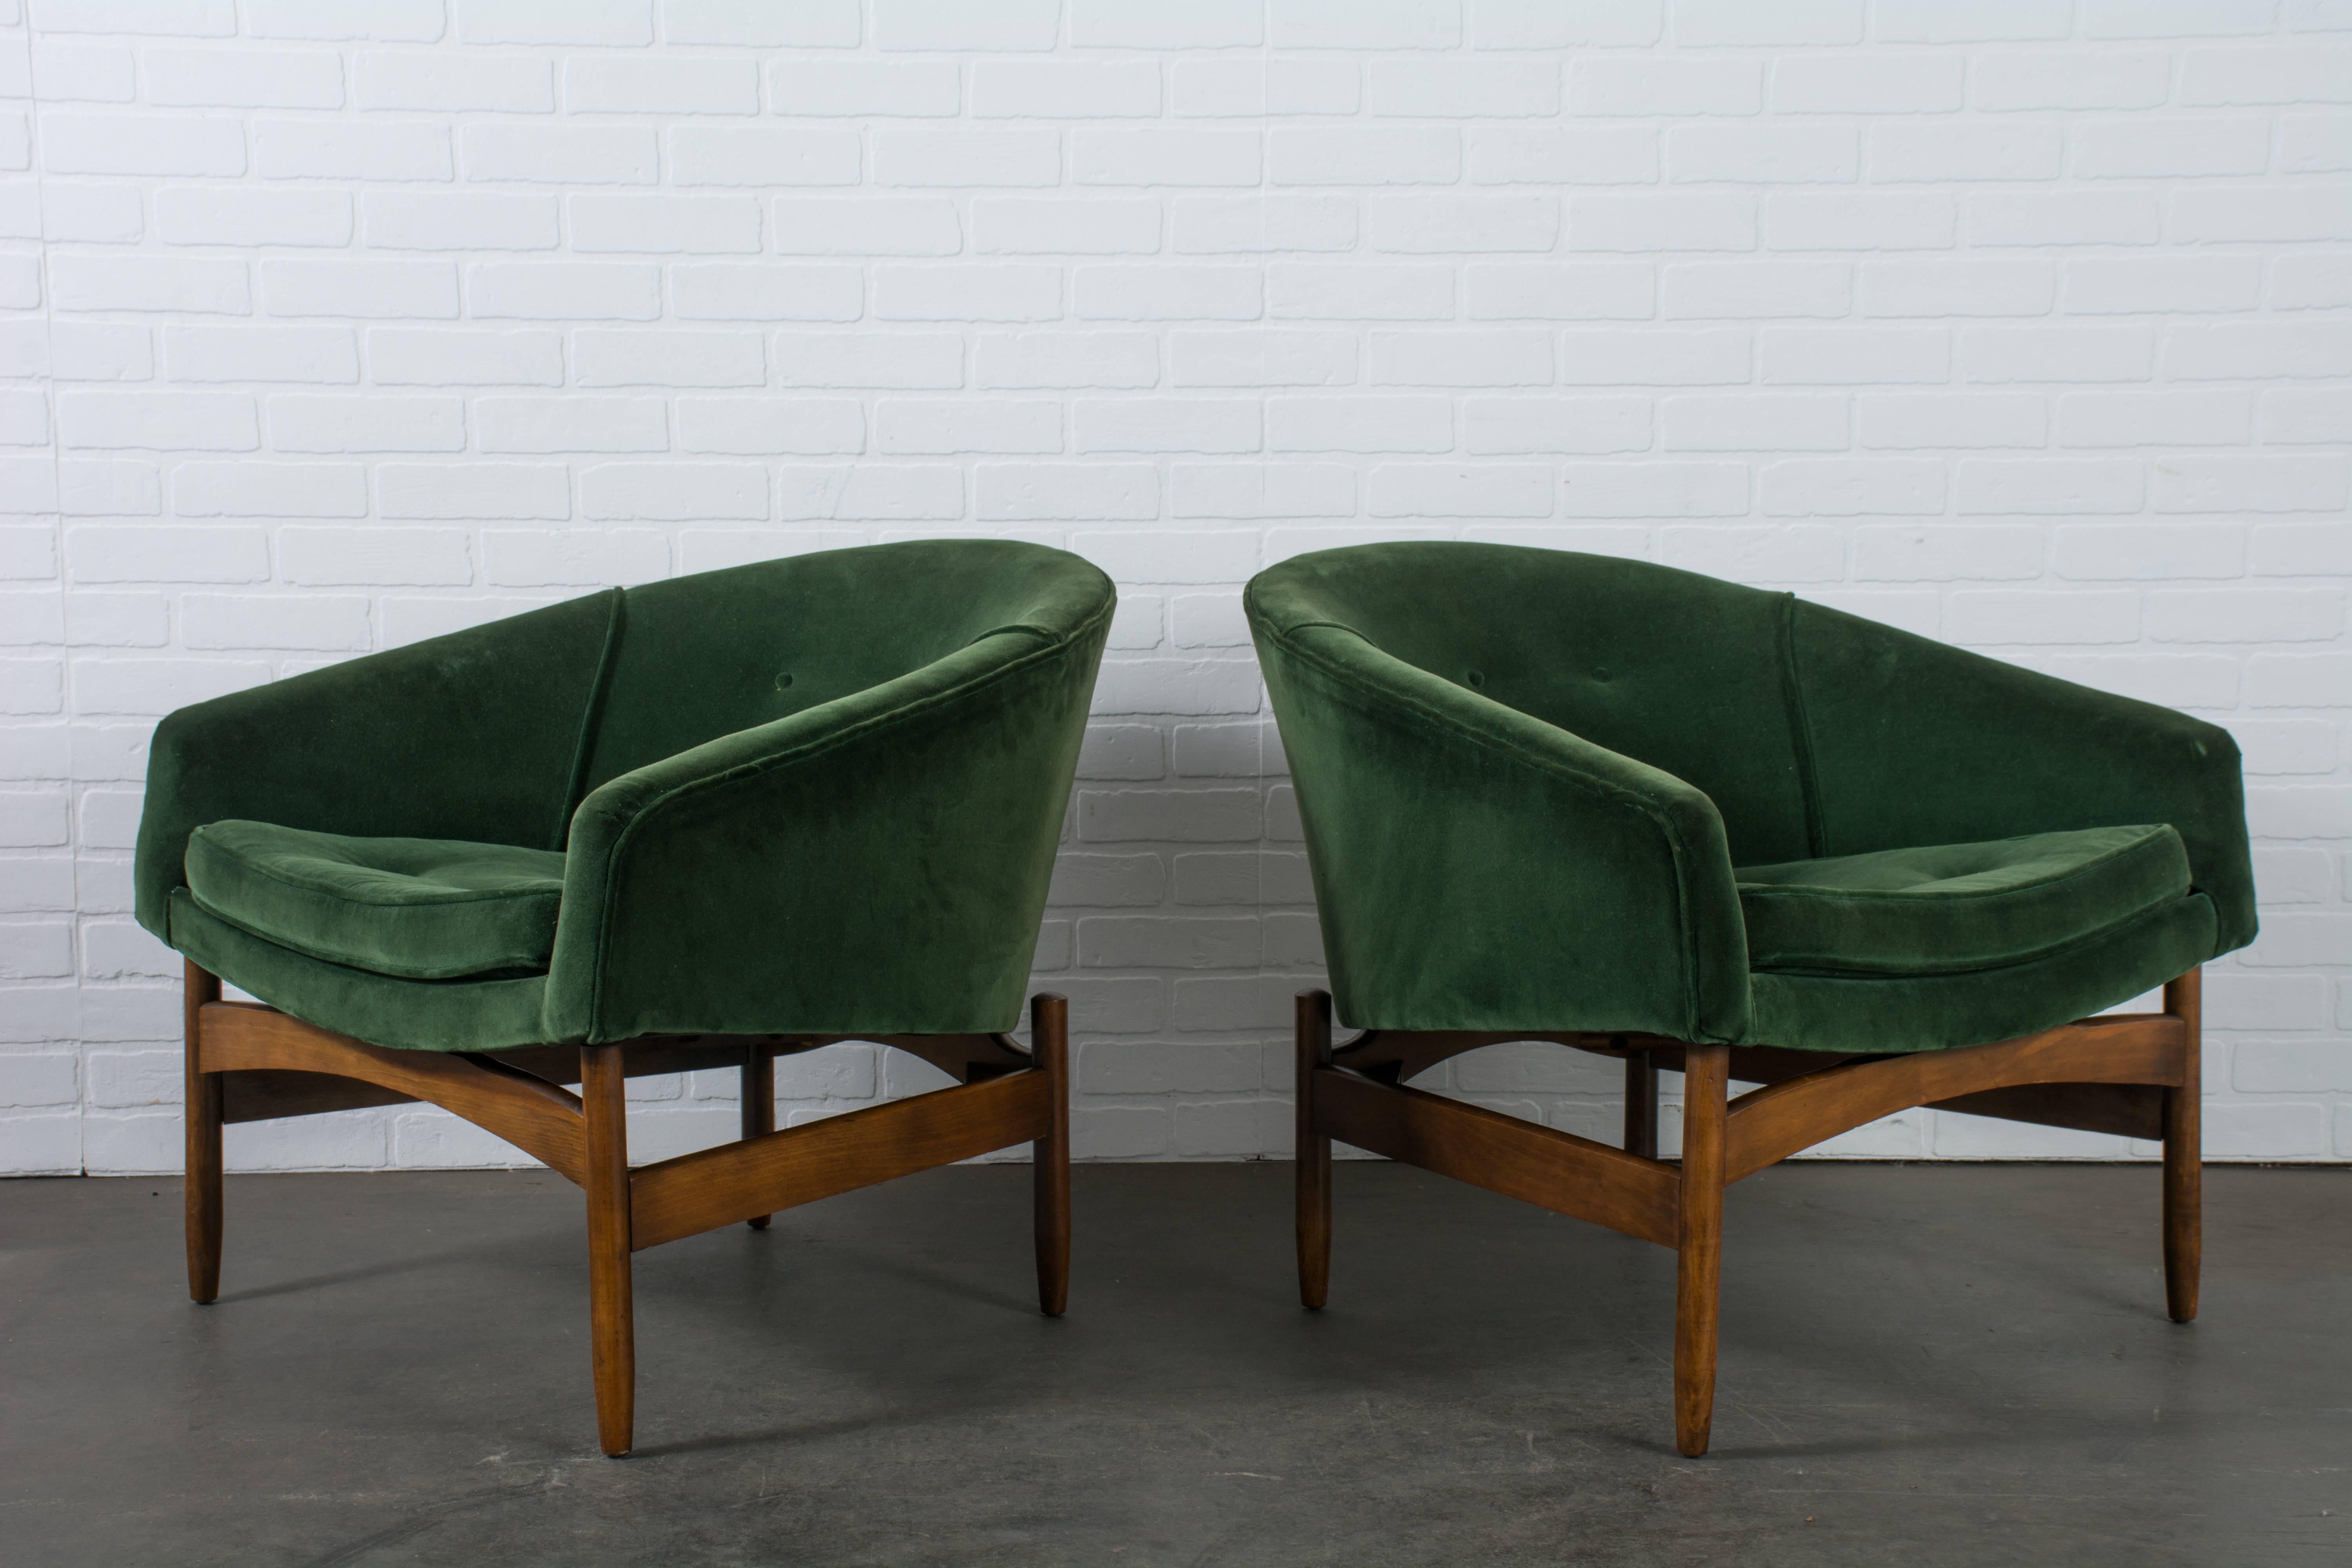 American Mid-Century Barrel Back Lounge Chairs by Lawrence Peabody for Nemschoff